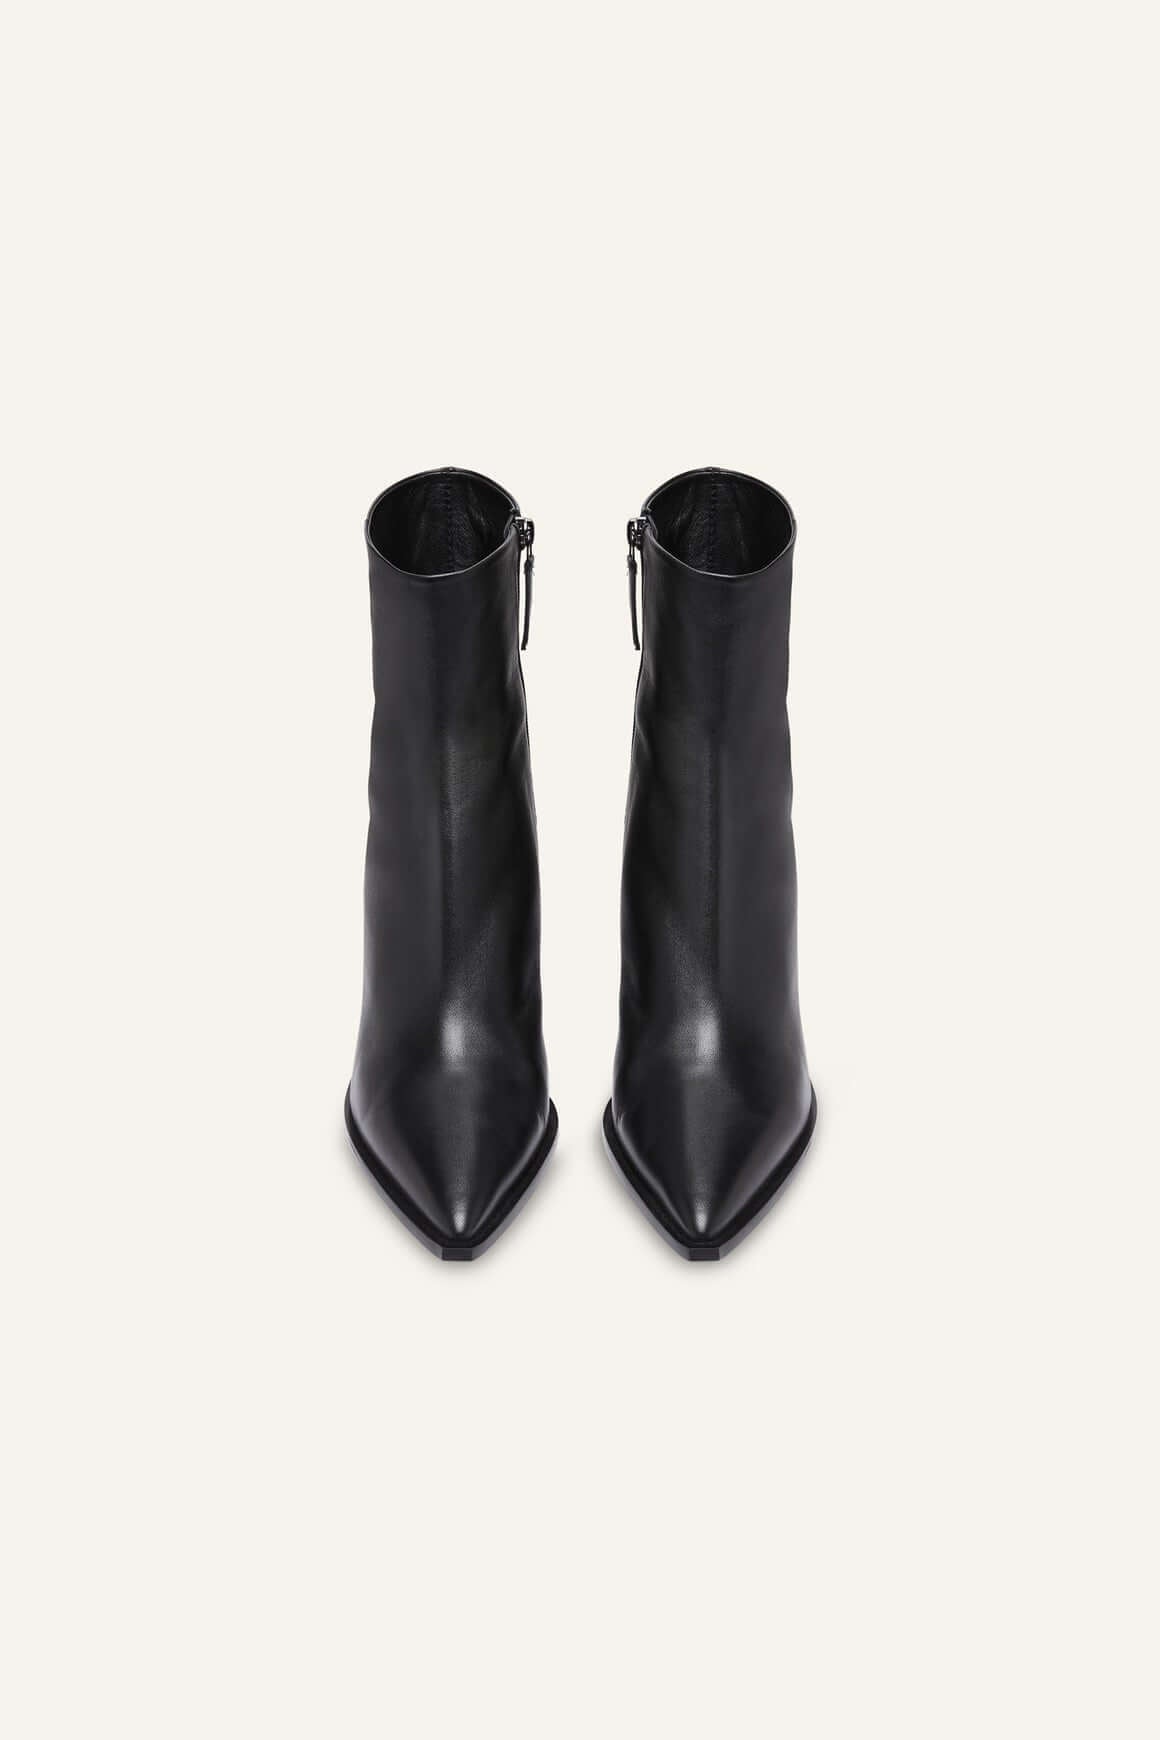 A.Emery Odin Boot in Black available at TNT The New Trend